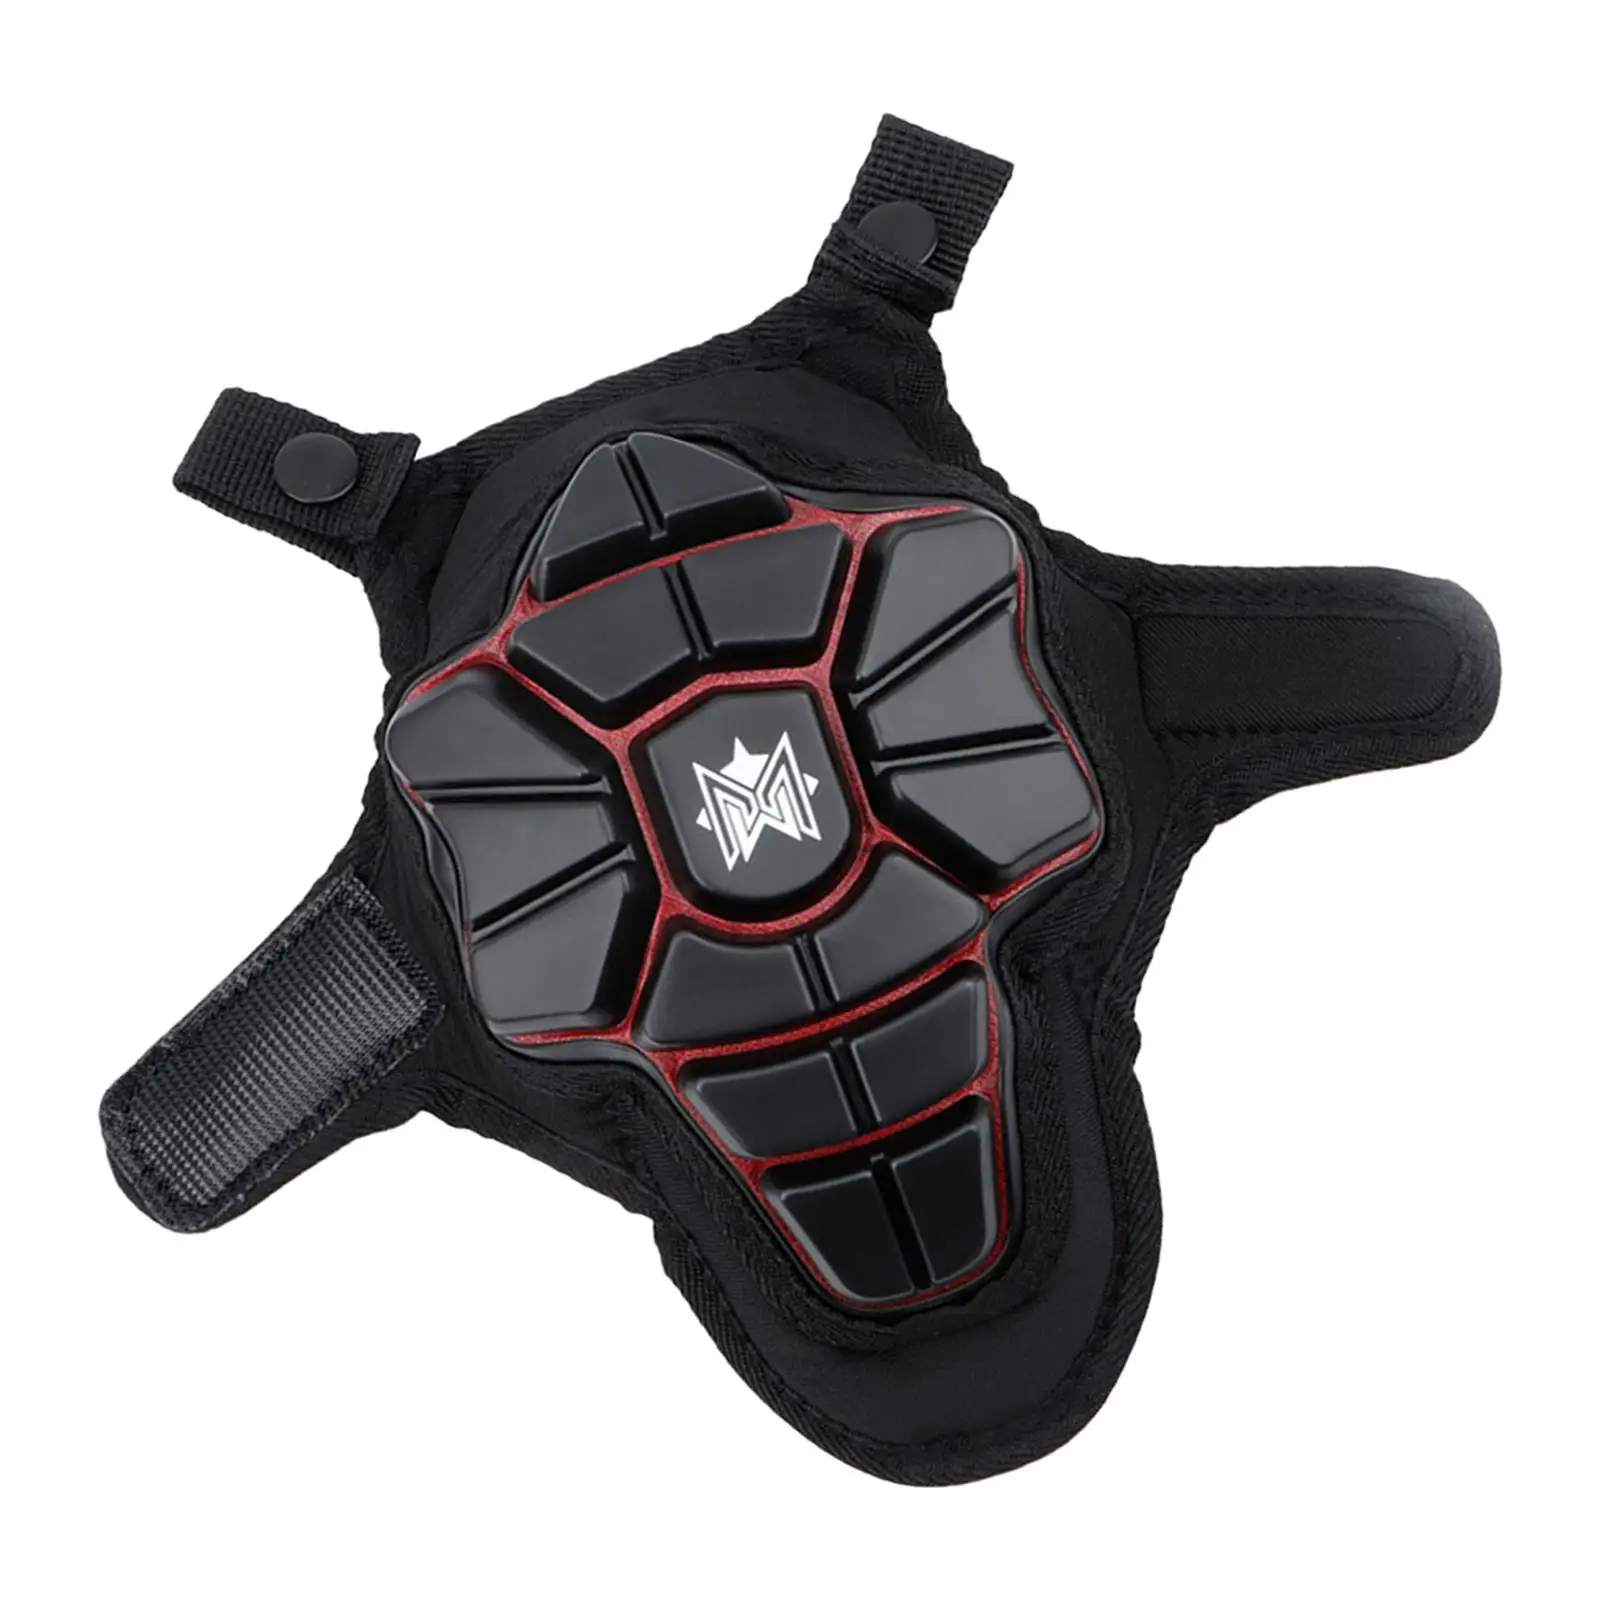 Scooter Stem Protective Cover Padded for Handlebar Cycling Accessorie Bike